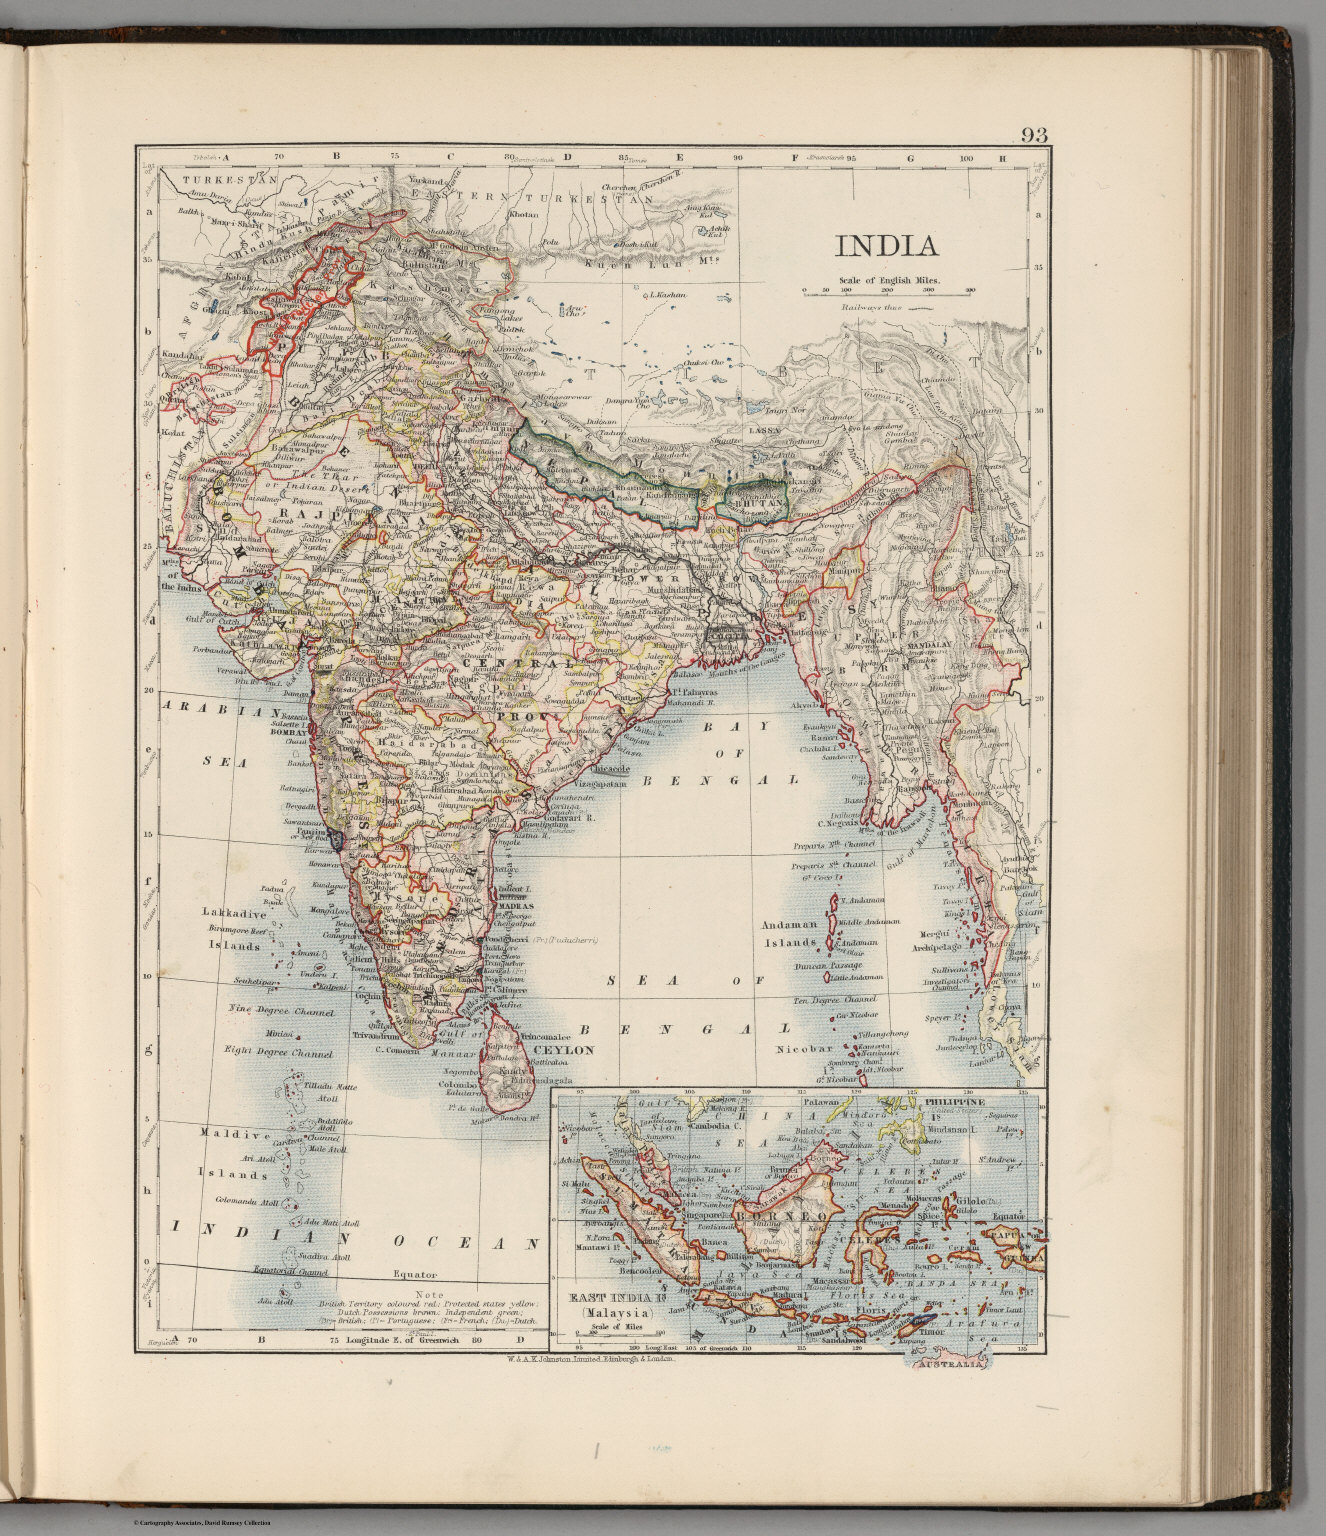 India. East India Is. - David Rumsey Historical Map Collection